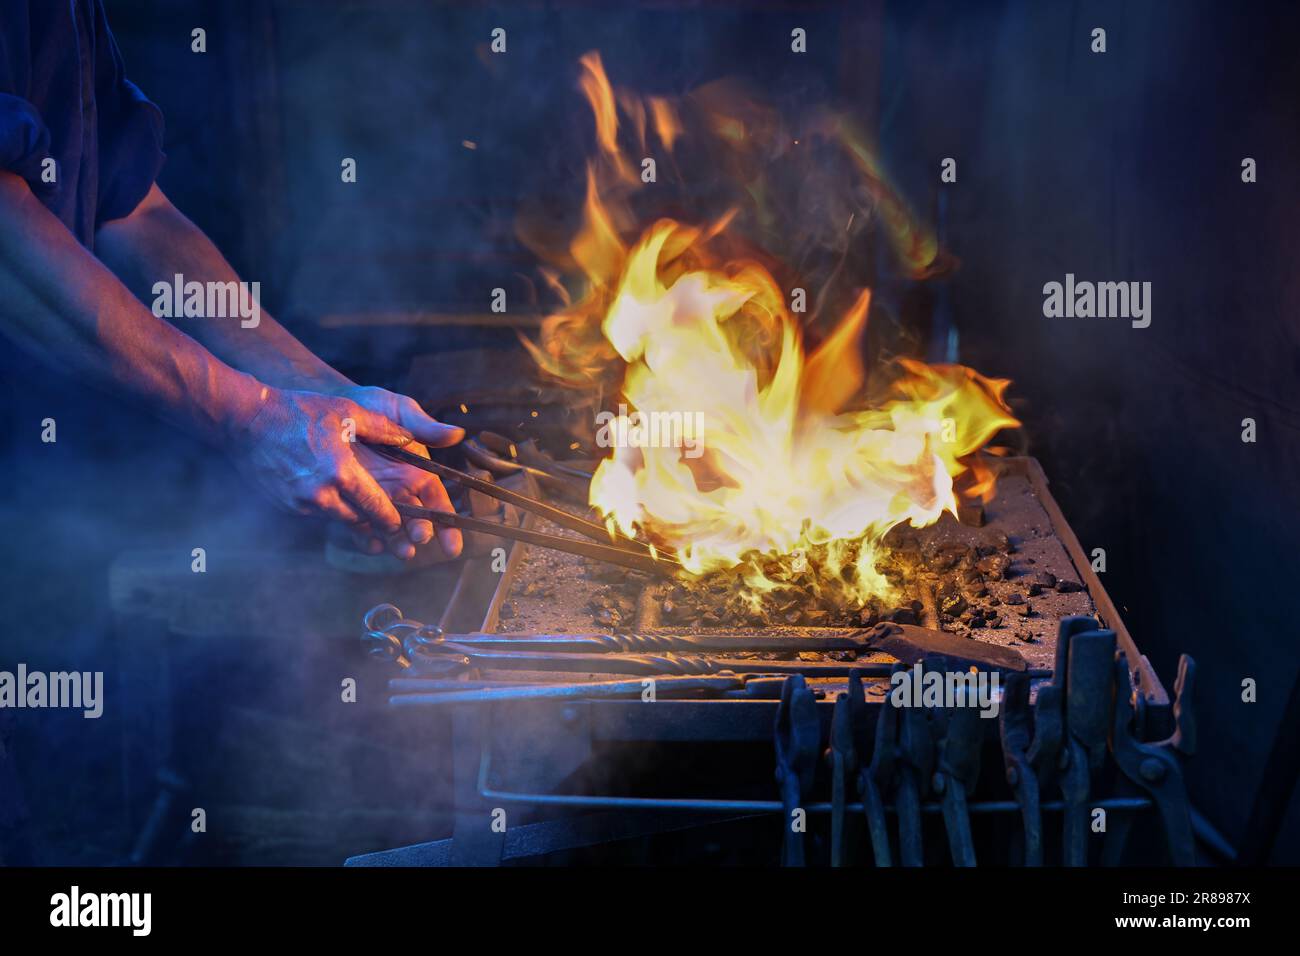 Hands of a blacksmith holding tongs with a workpiece in the blazing fire on the forge to get the iron glowing, smoke in the dark background, copy spac Stock Photo